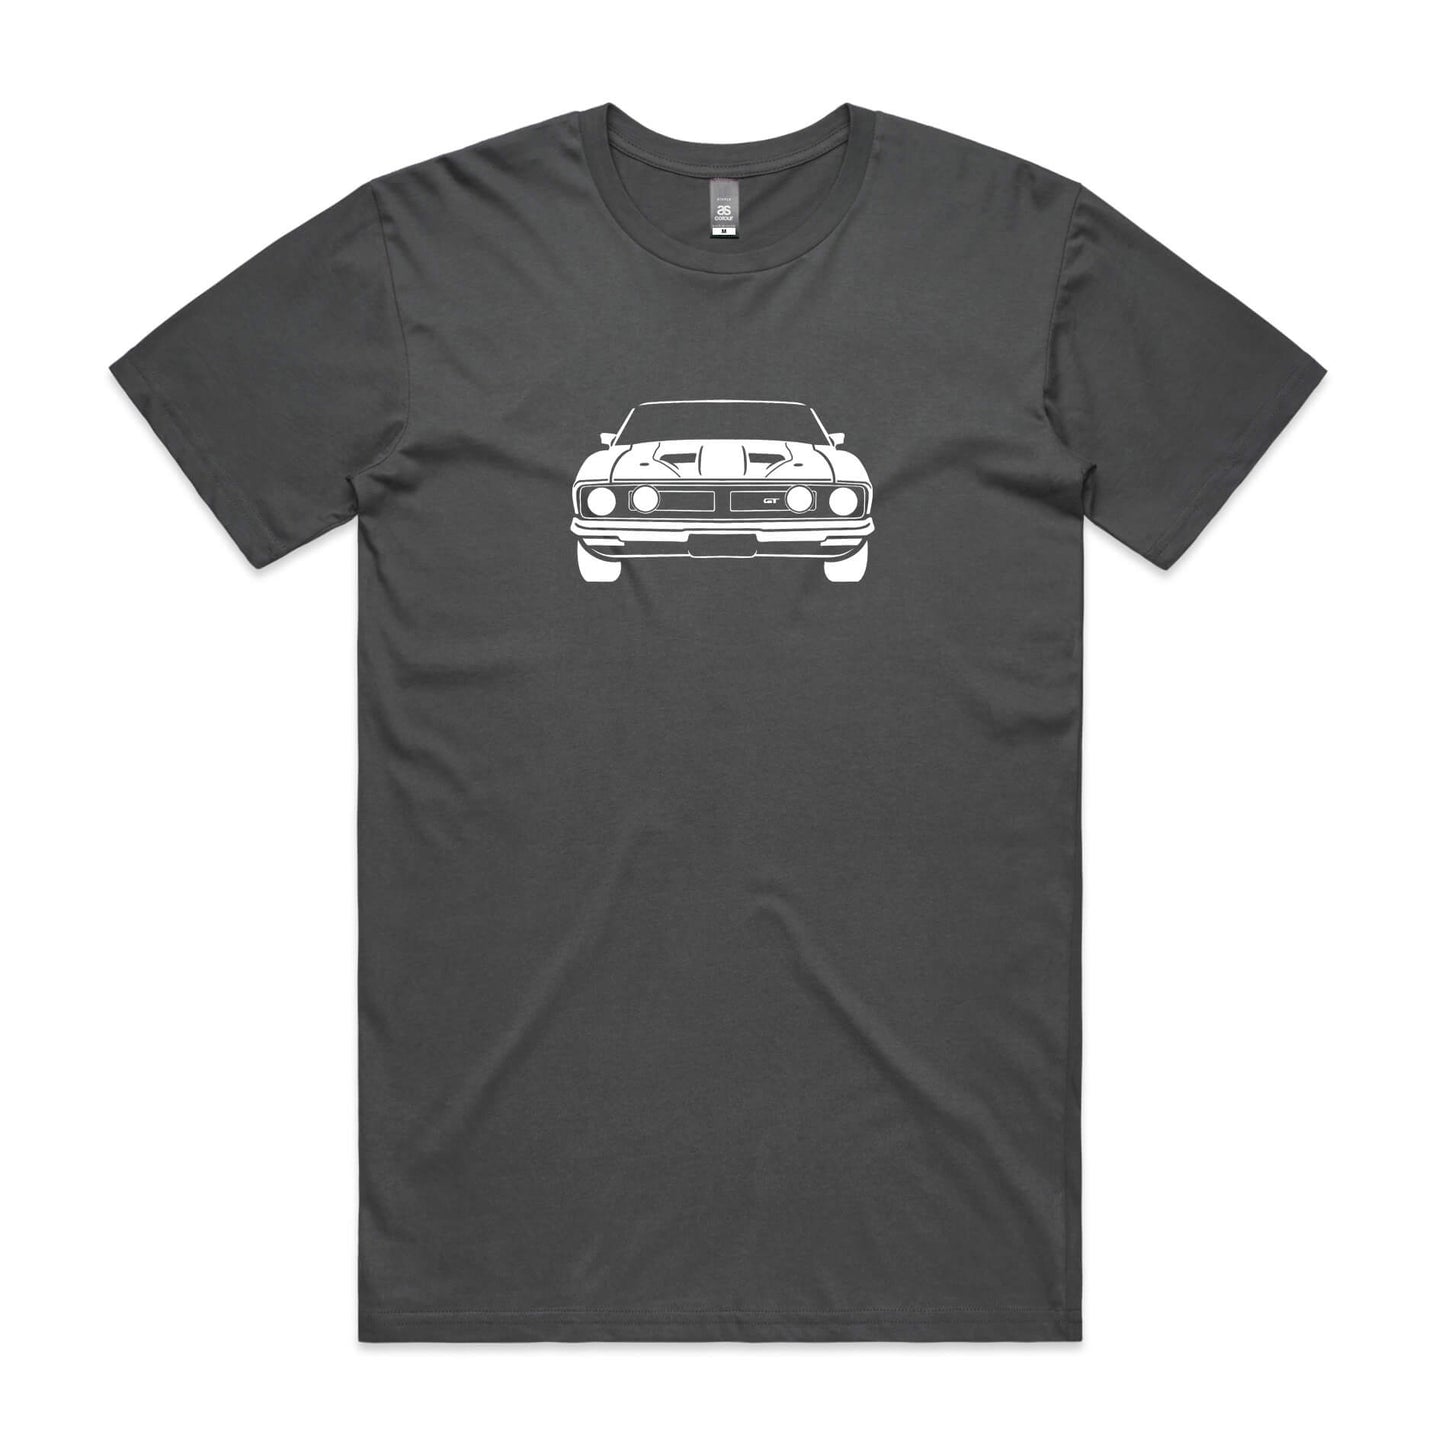 Ford XB Falcon t-shirt in charcoal grey with a black coupe graphic